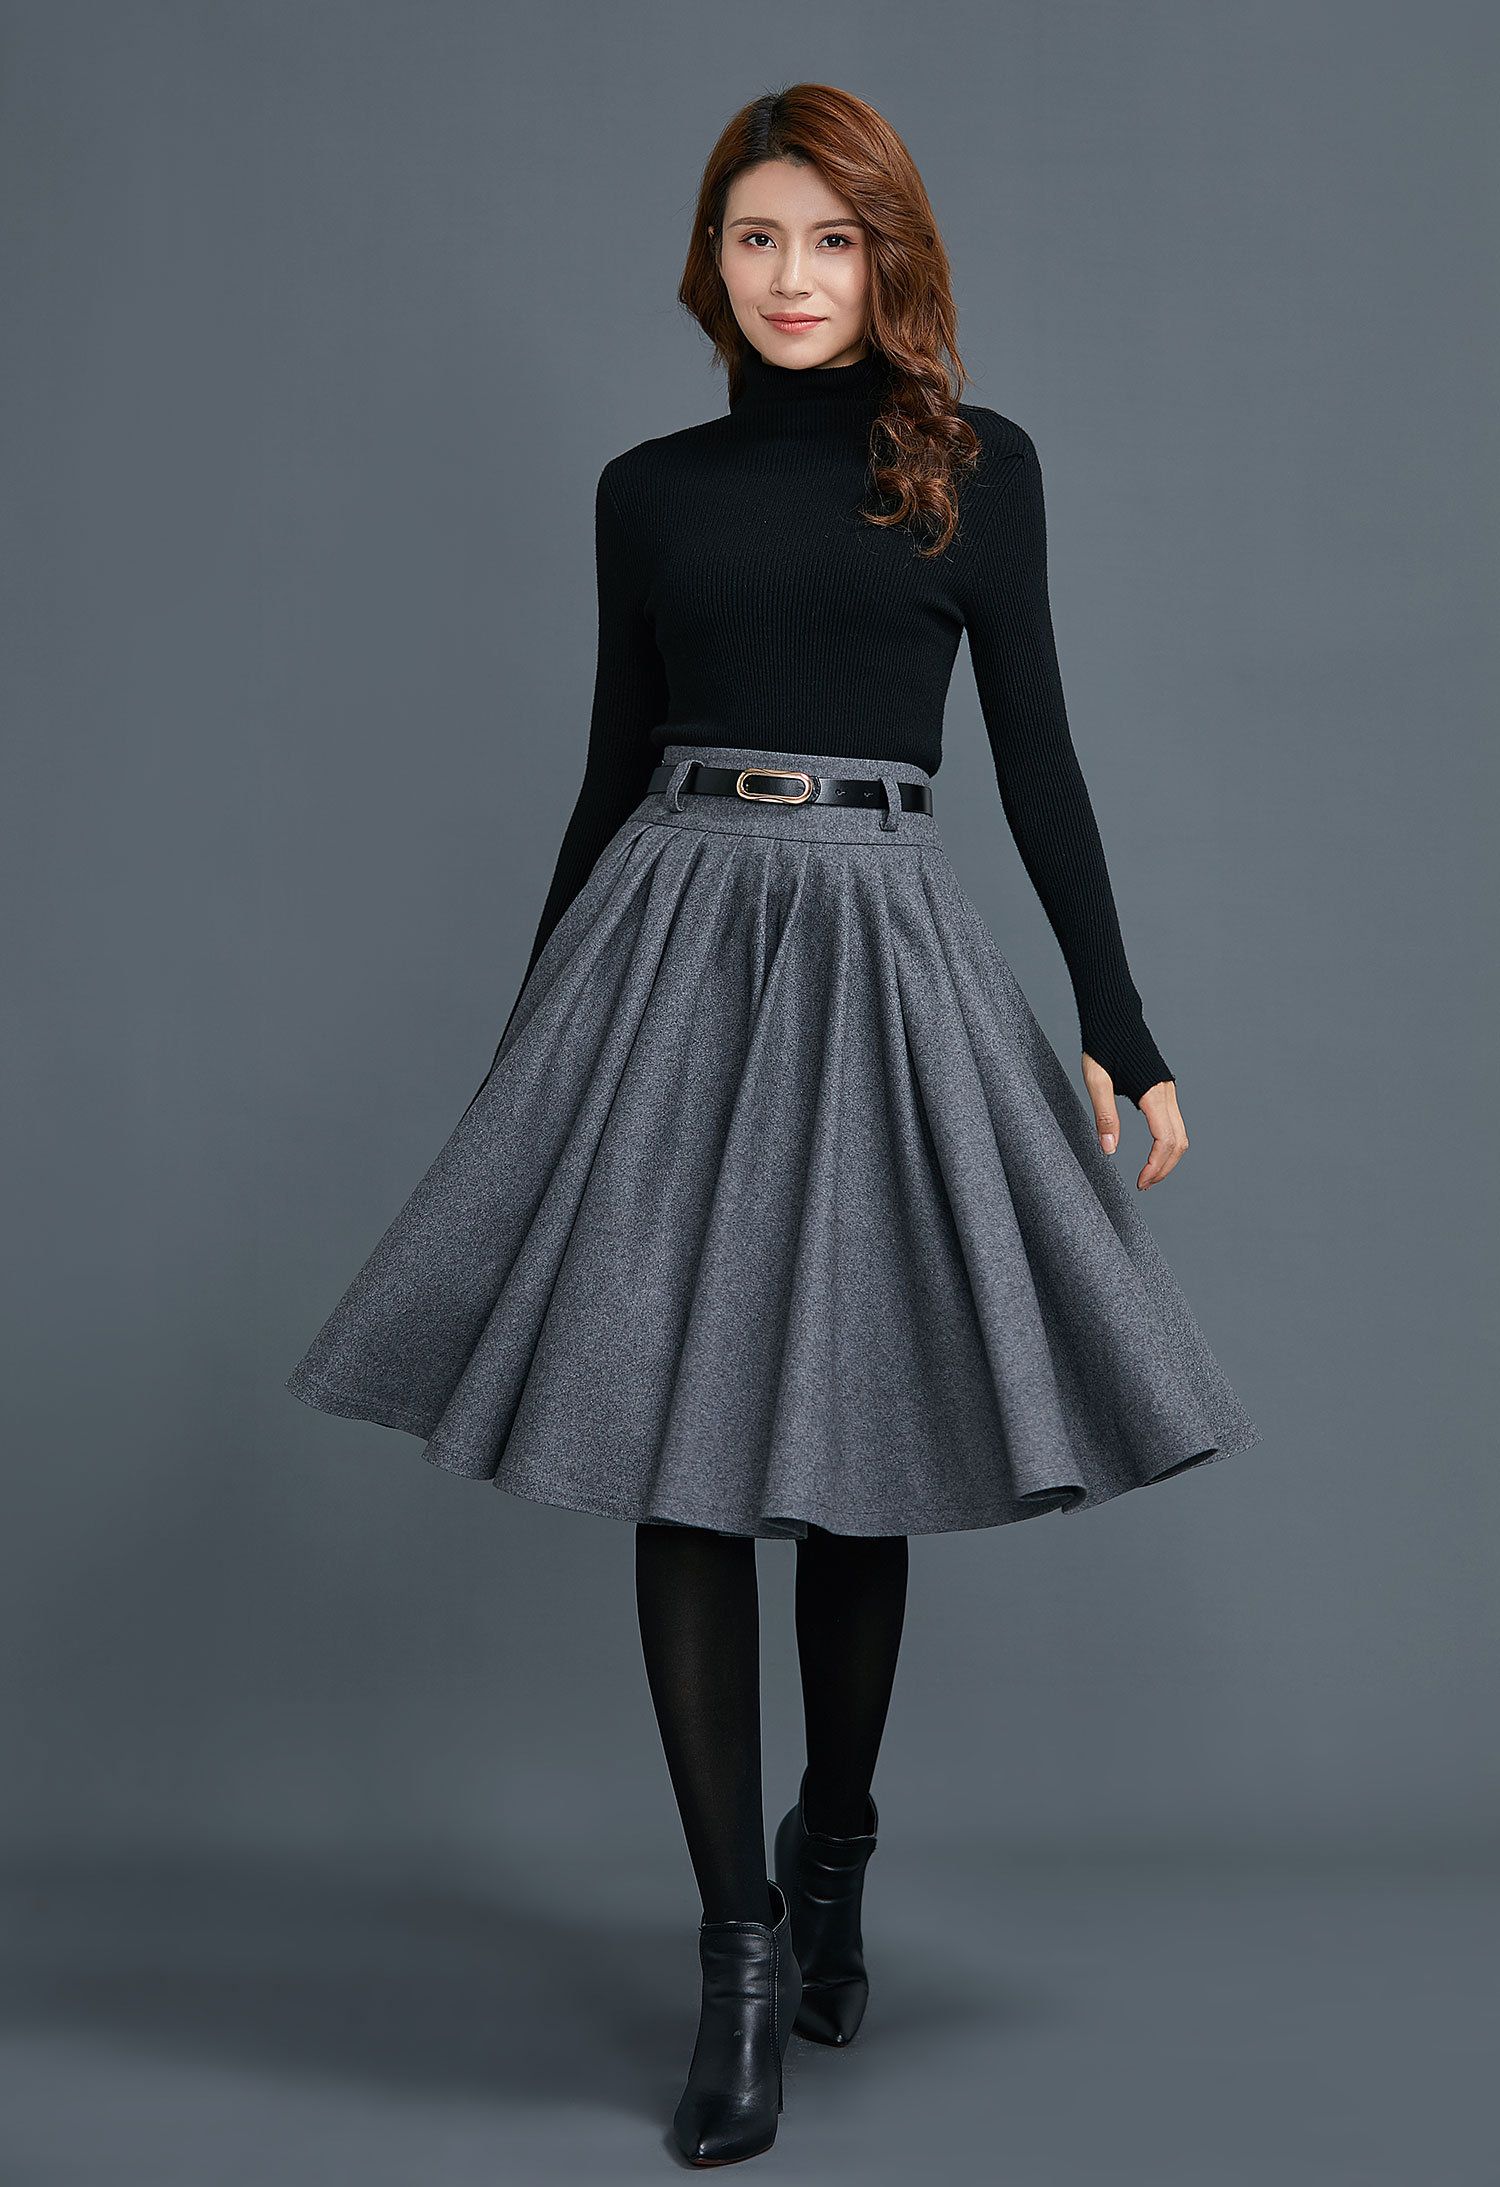 How to Wear Skirts with Pockets: 13 Attractive Outfit Ideas